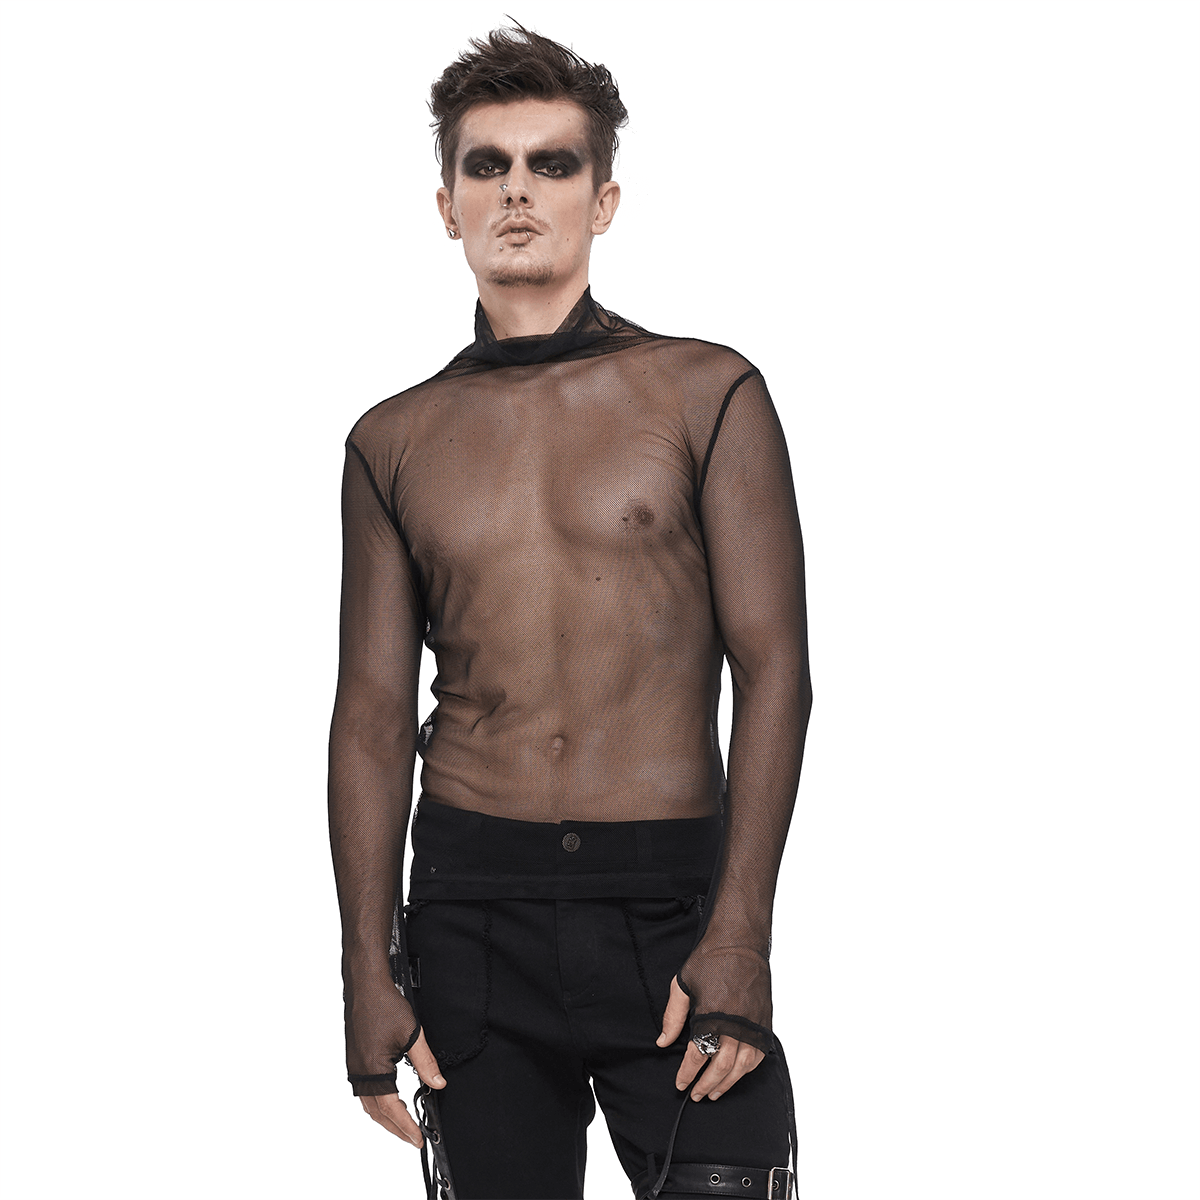 Black  Punk Net Transparent Long Sleeve Top for Men / Gothic Male Slim Fit Round Neck Tops - HARD'N'HEAVY